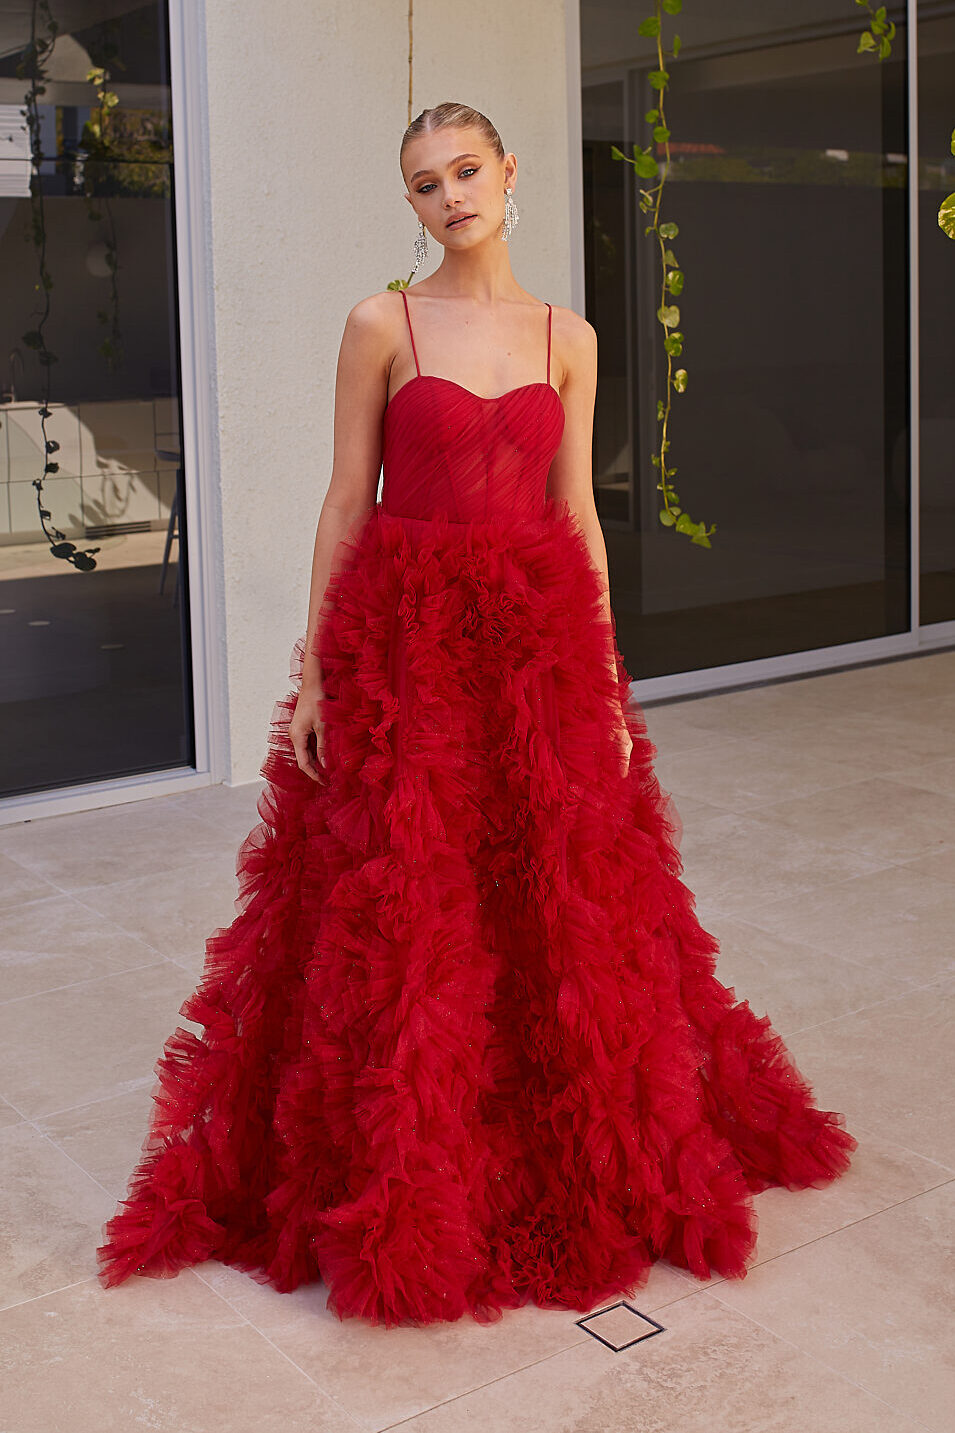 TANIA OLSEN Devere Gown (Ruby Red)